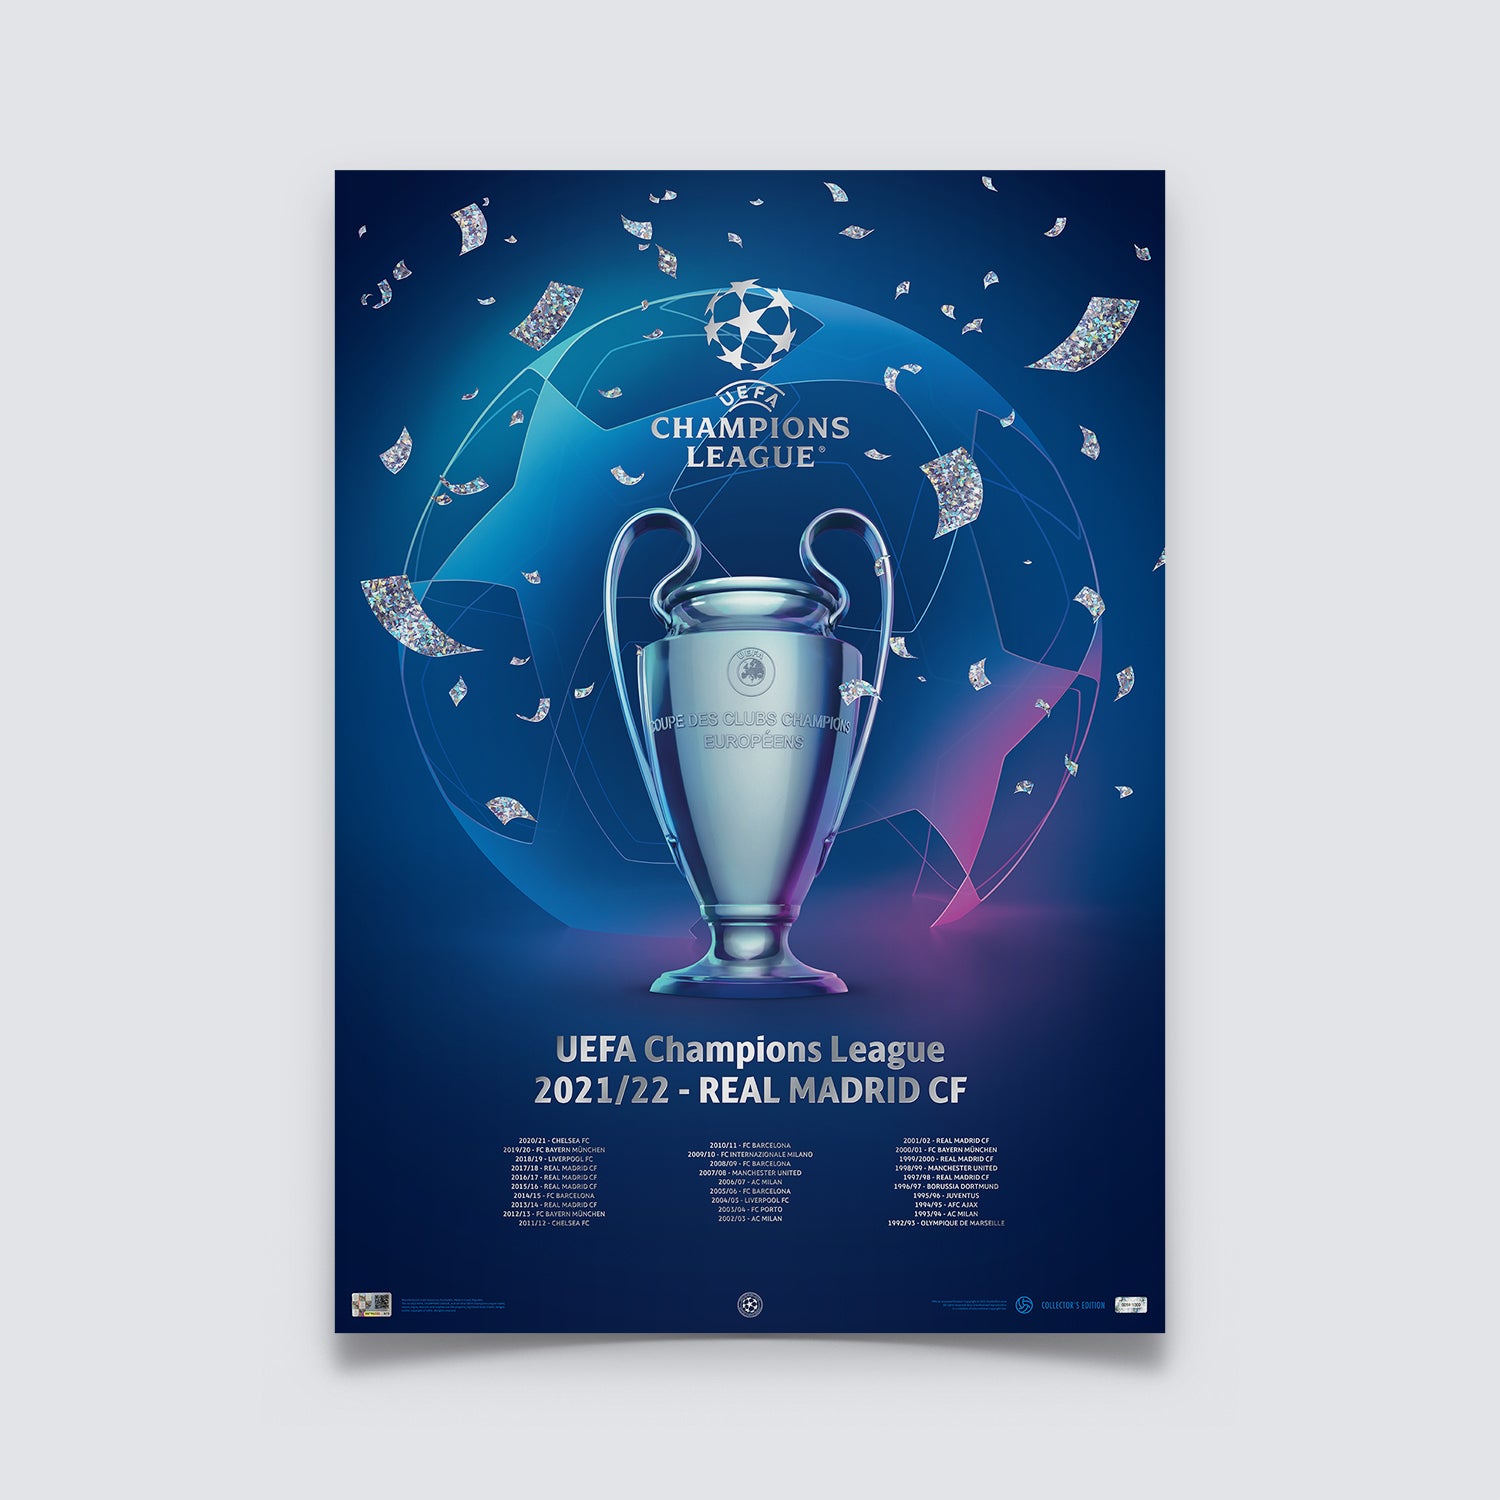 Uefa Champions League Iconic Trophy Poster Real Madrid Cf 21 2 Uefa Club Competitions Online Store